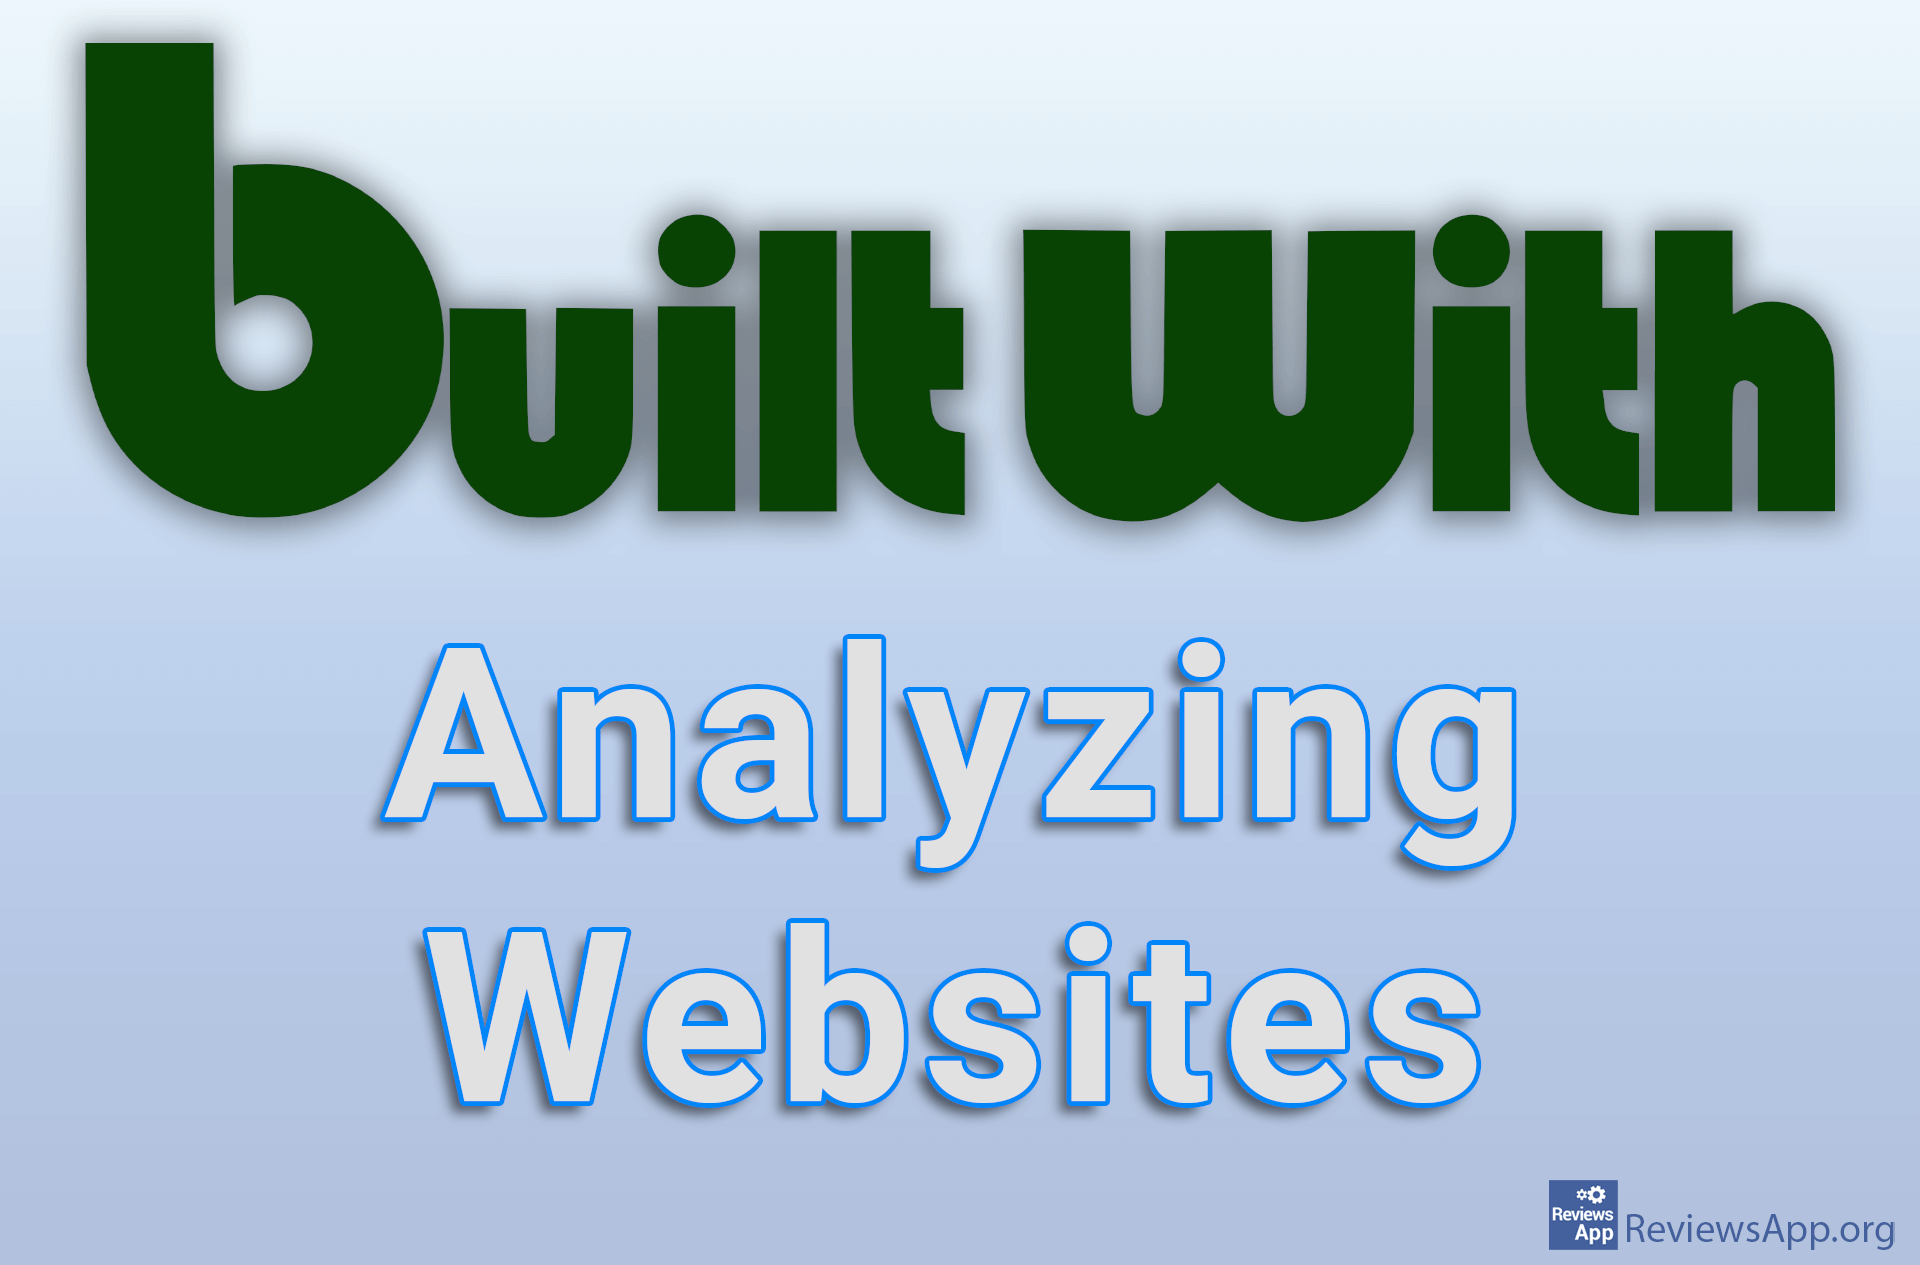 BuiltWith – Analyzing Websites